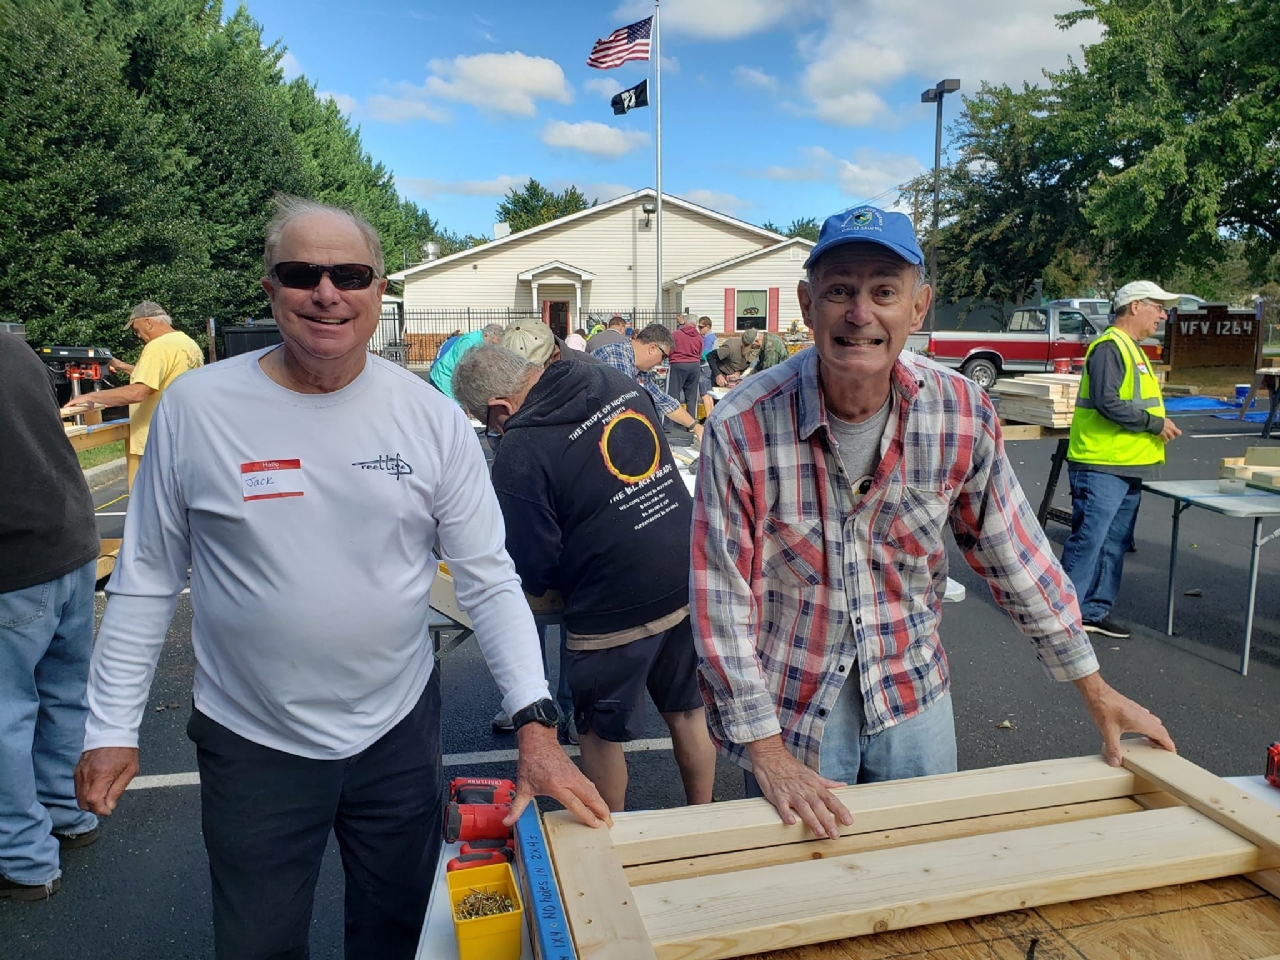 VFW Post 1264. Post 1264 Auxiliary and Volunteers were Pleased to Partner with Sleep with Heavenly Peace making 30 plus beds for children.  This is a Good example of how this Post helps with the local Community.  Over 39 Volunteers,  the Post providing all supplies.